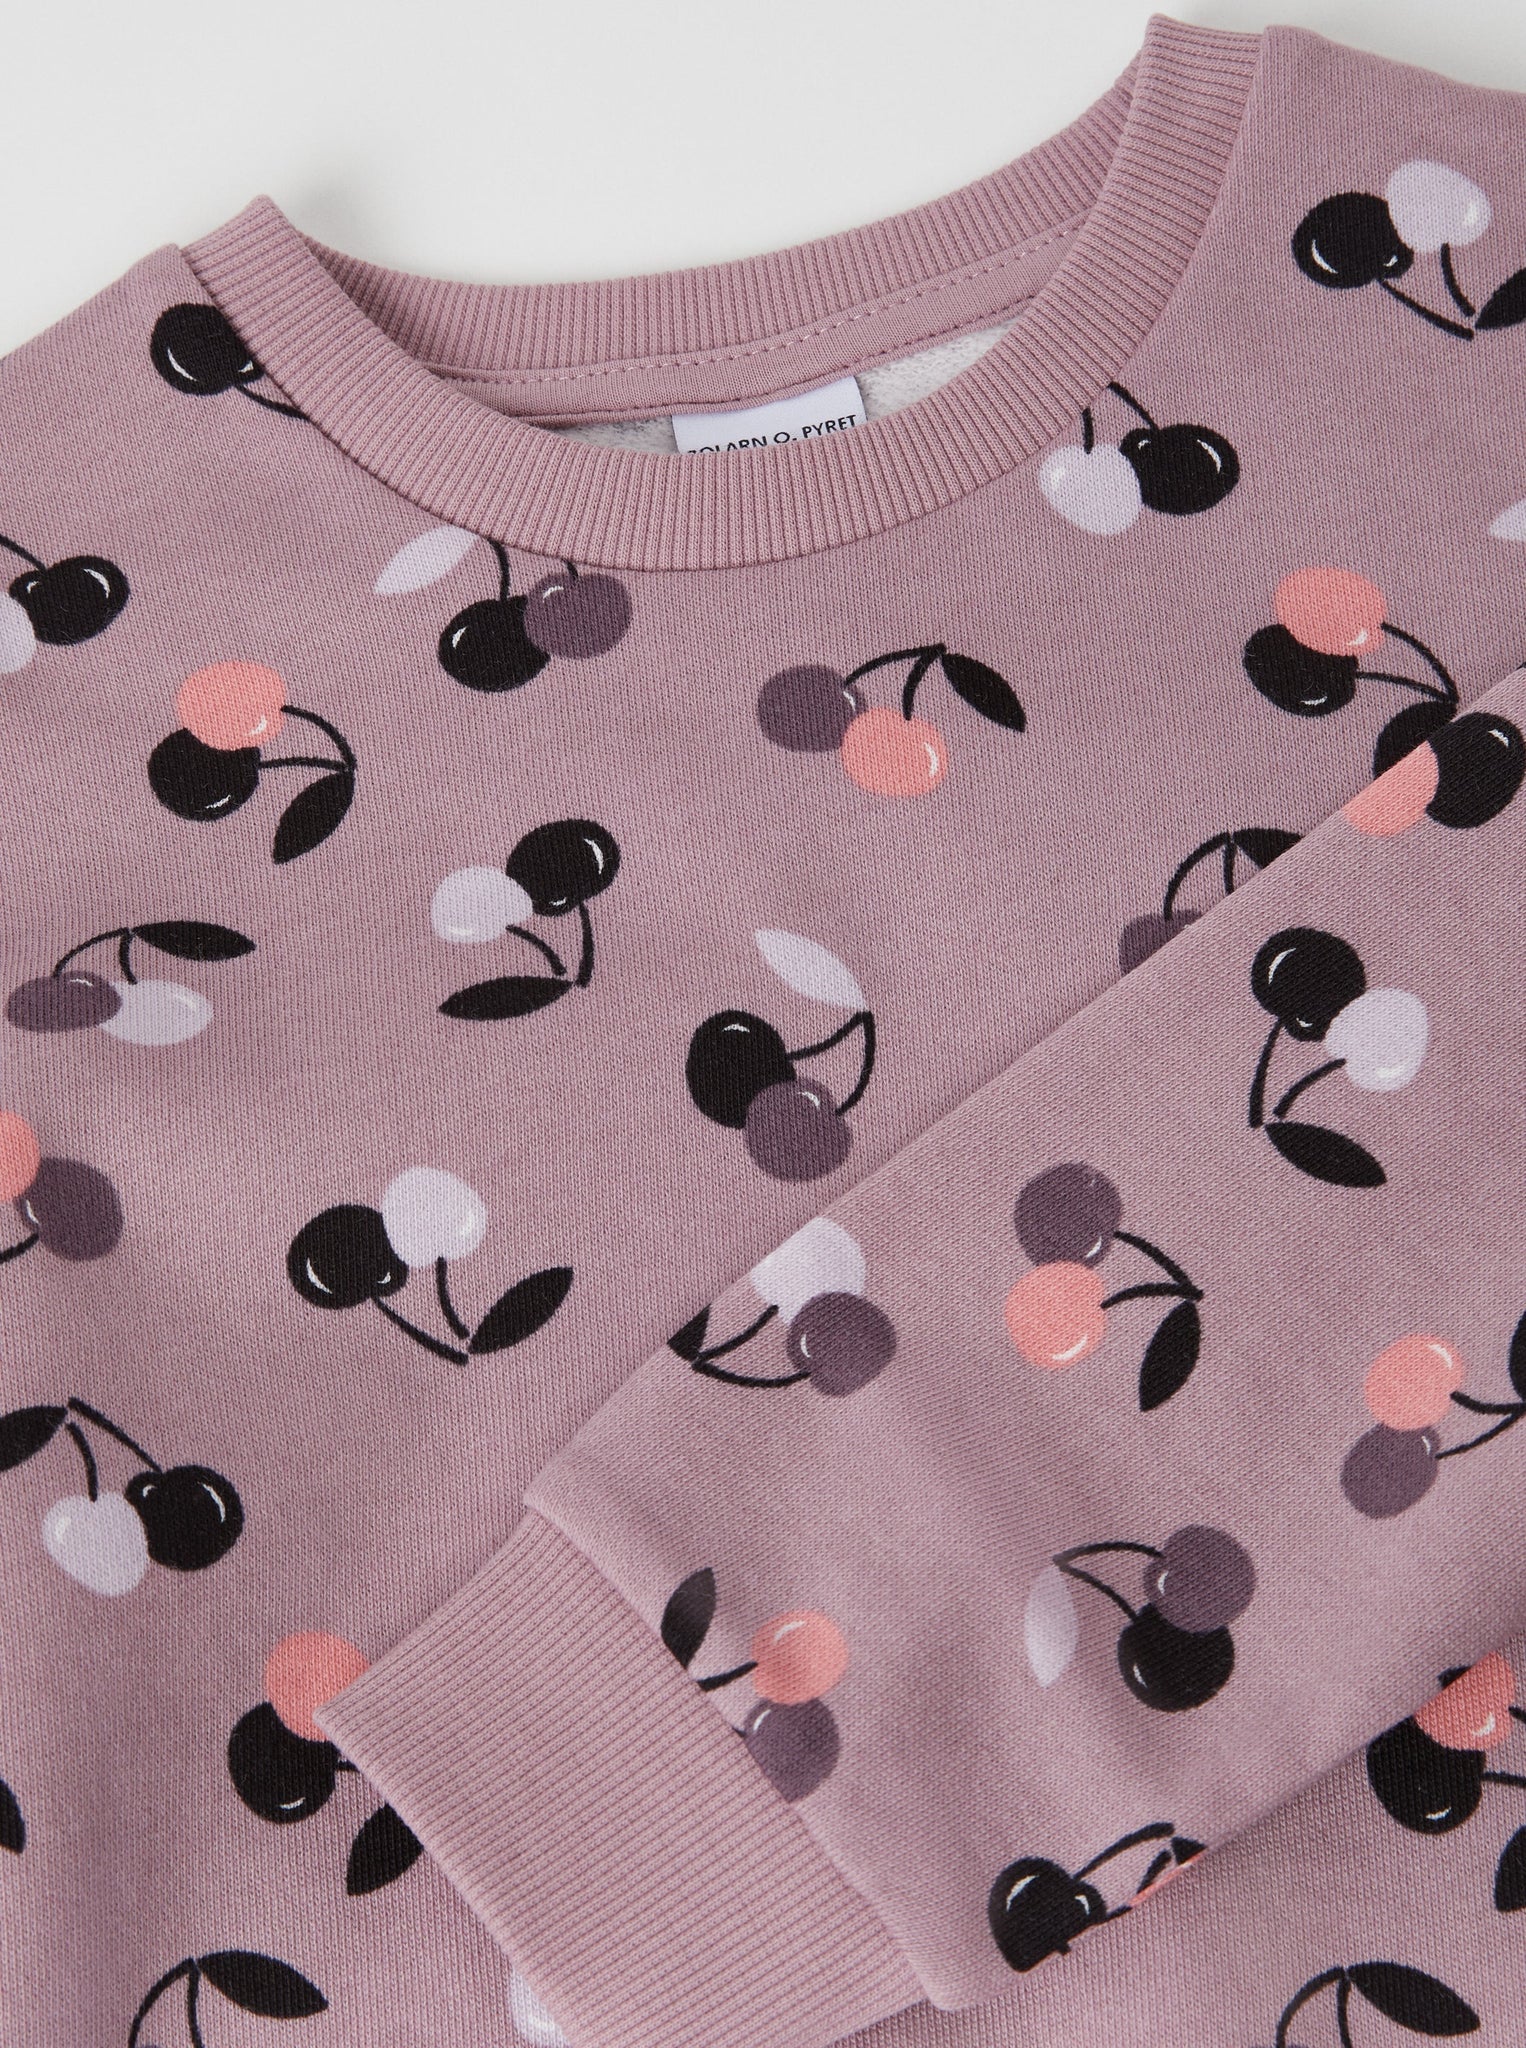 Cotton Pink Cherry Kids Sweatshirt from the Polarn O. Pyret kidswear collection. Ethically produced kids clothing.